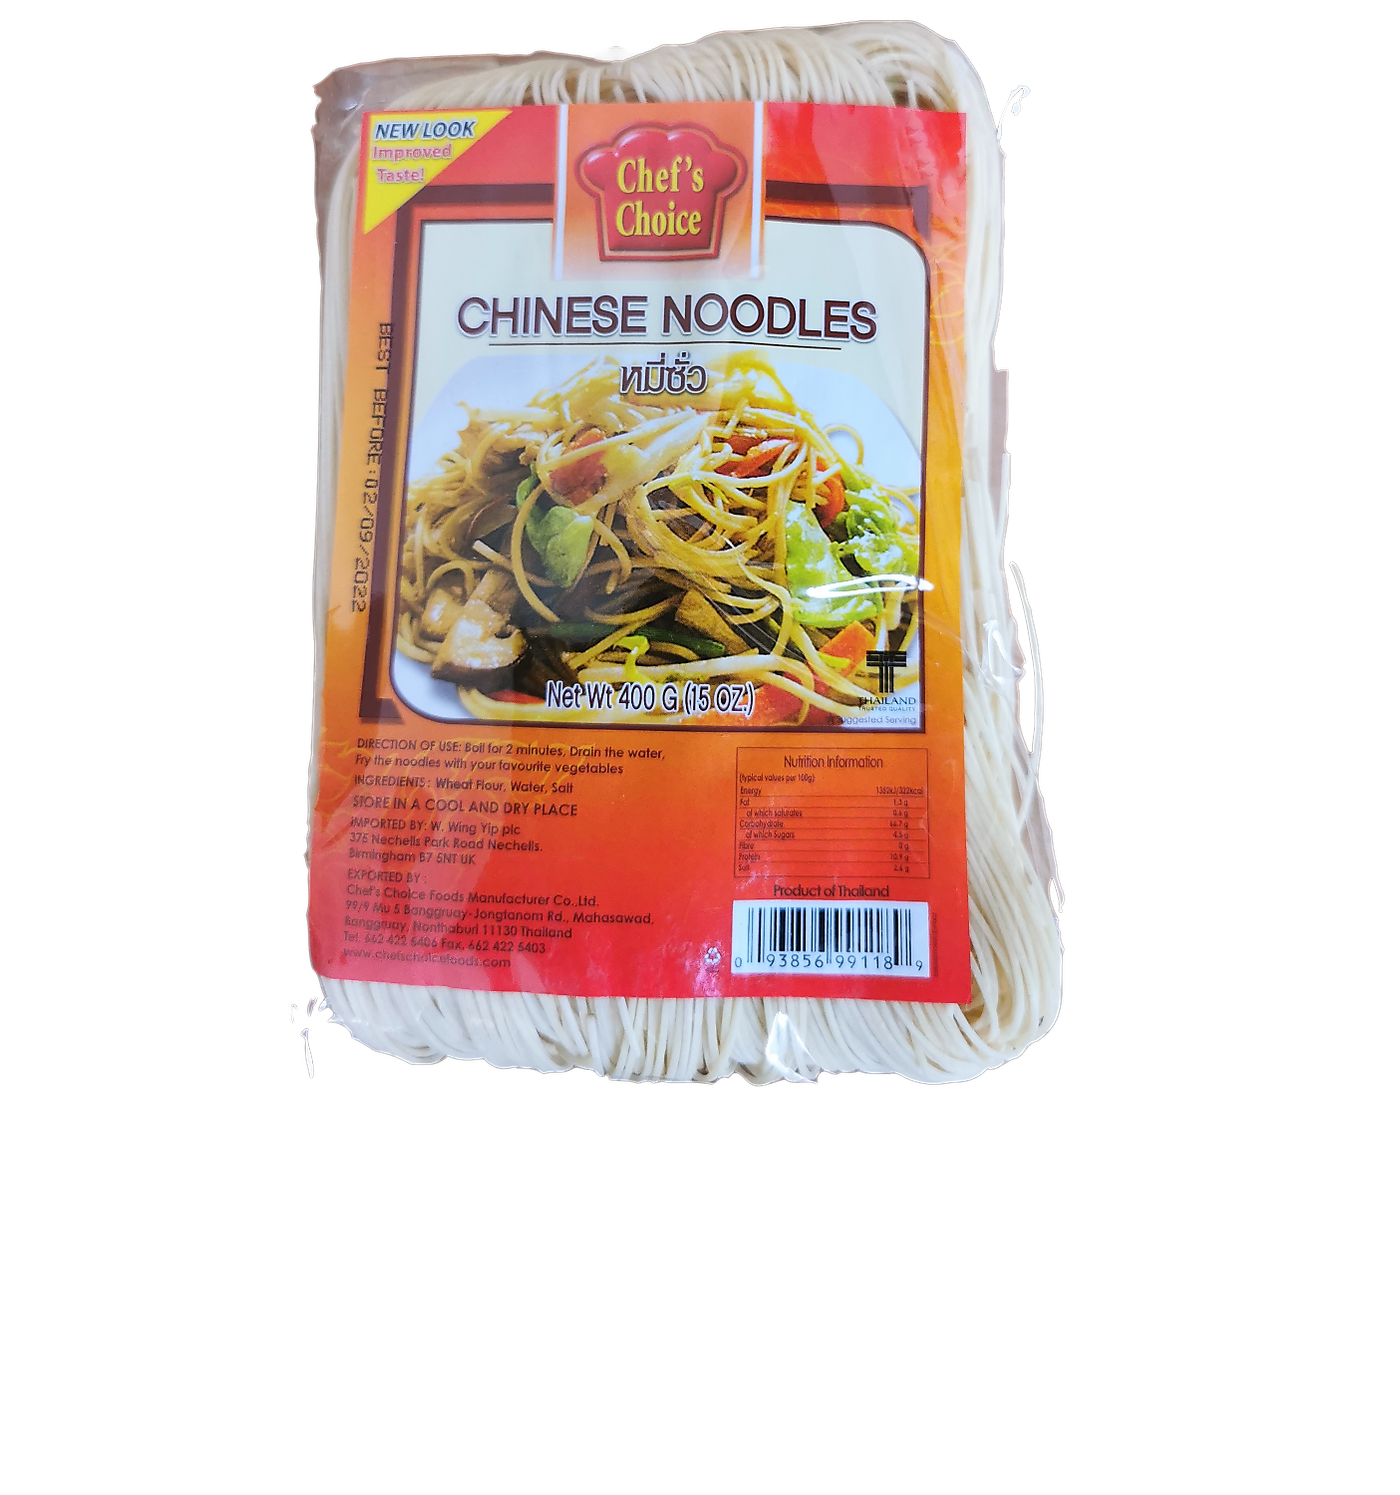 Chefs Choice Chinese Noodles